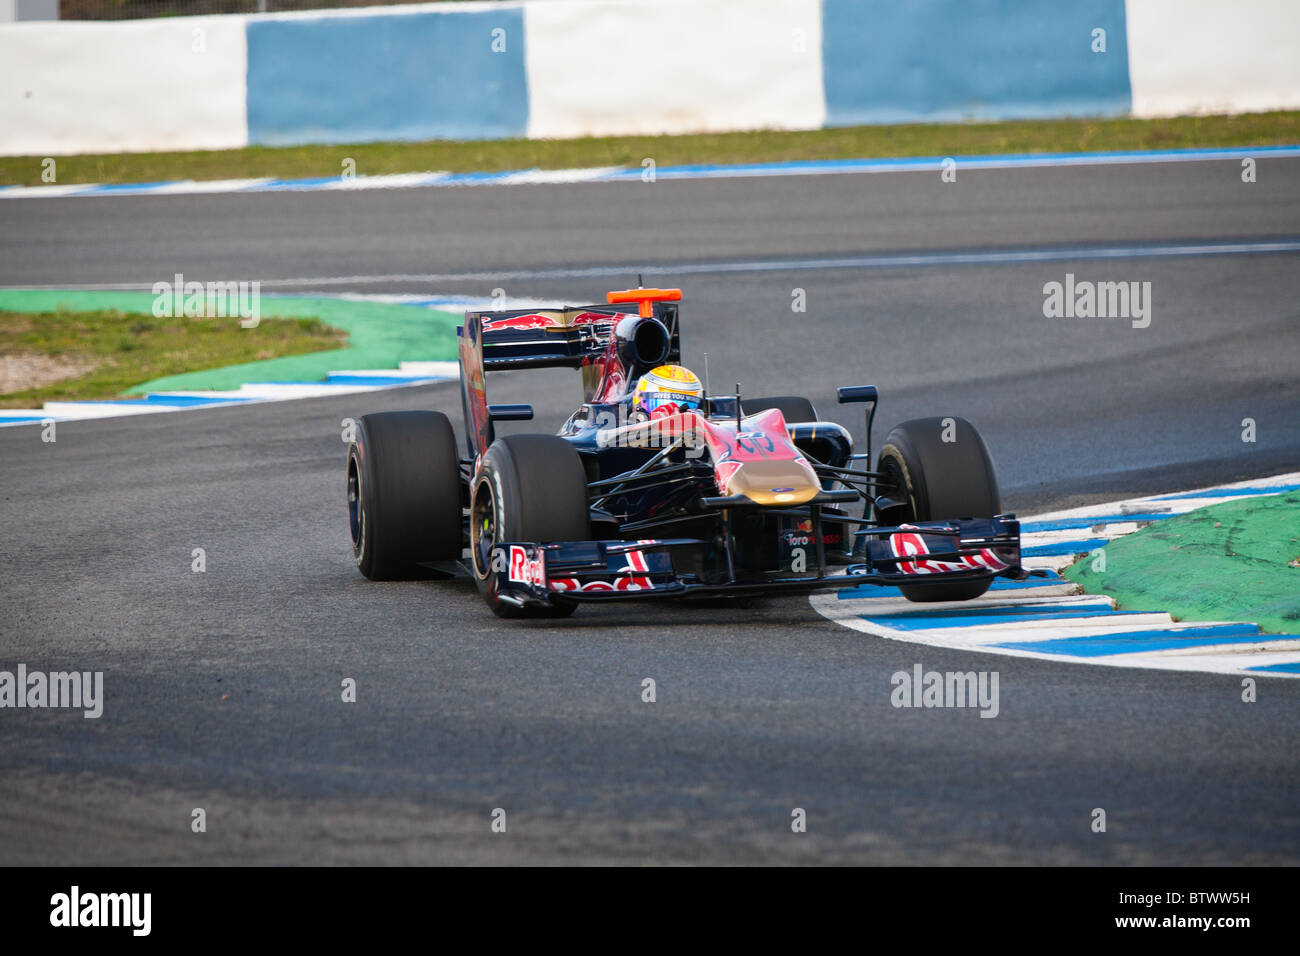 S. Buemi at the 2010 Jerez practice in his Toro Rosso, Formula 1 car, leaving the chicane. Stock Photo